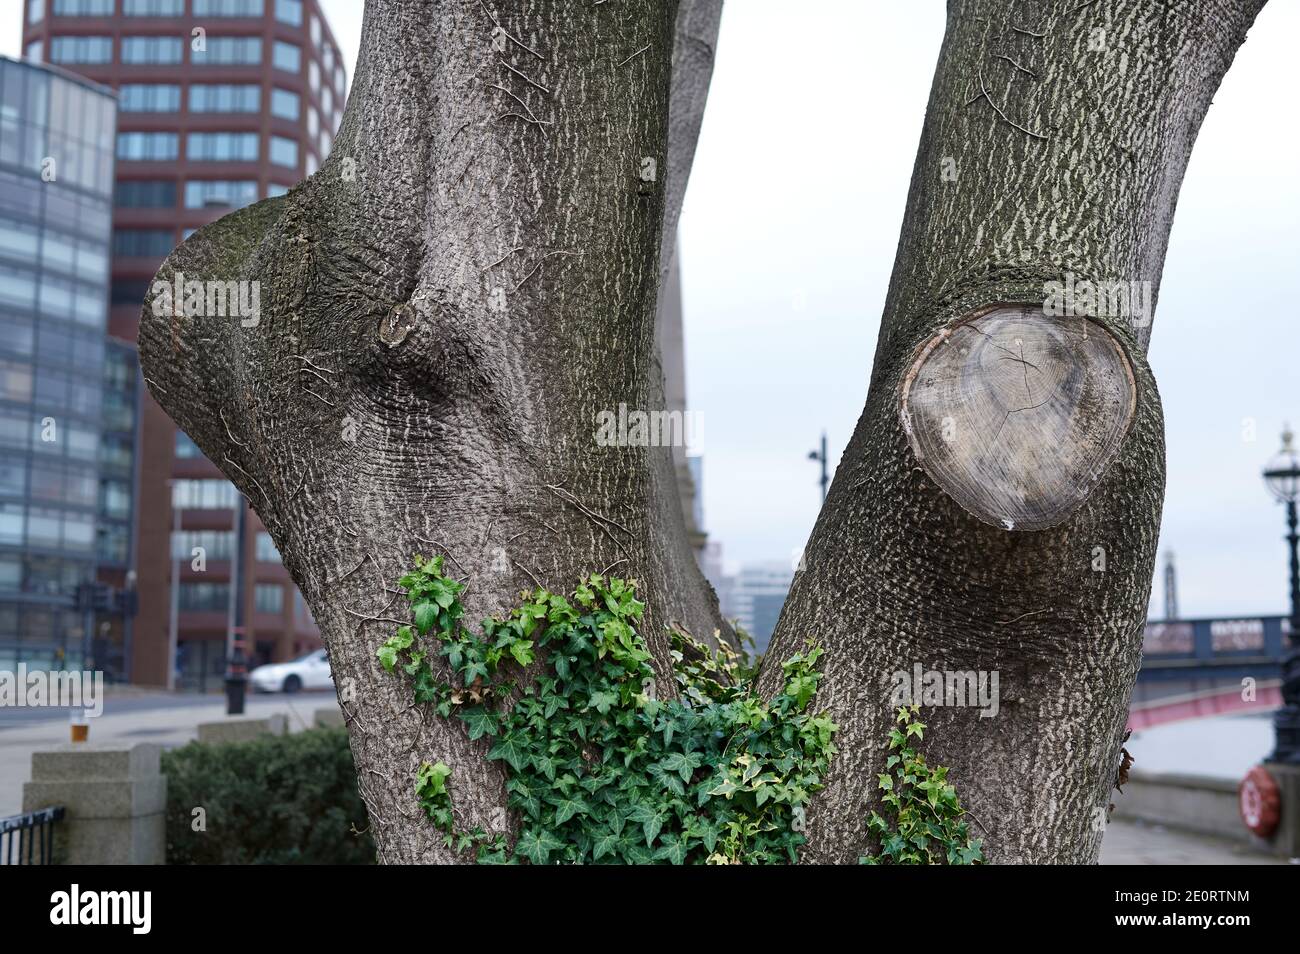 English ivy wrapped around a tree trunk showing textured bark in winter with a city background Stock Photo